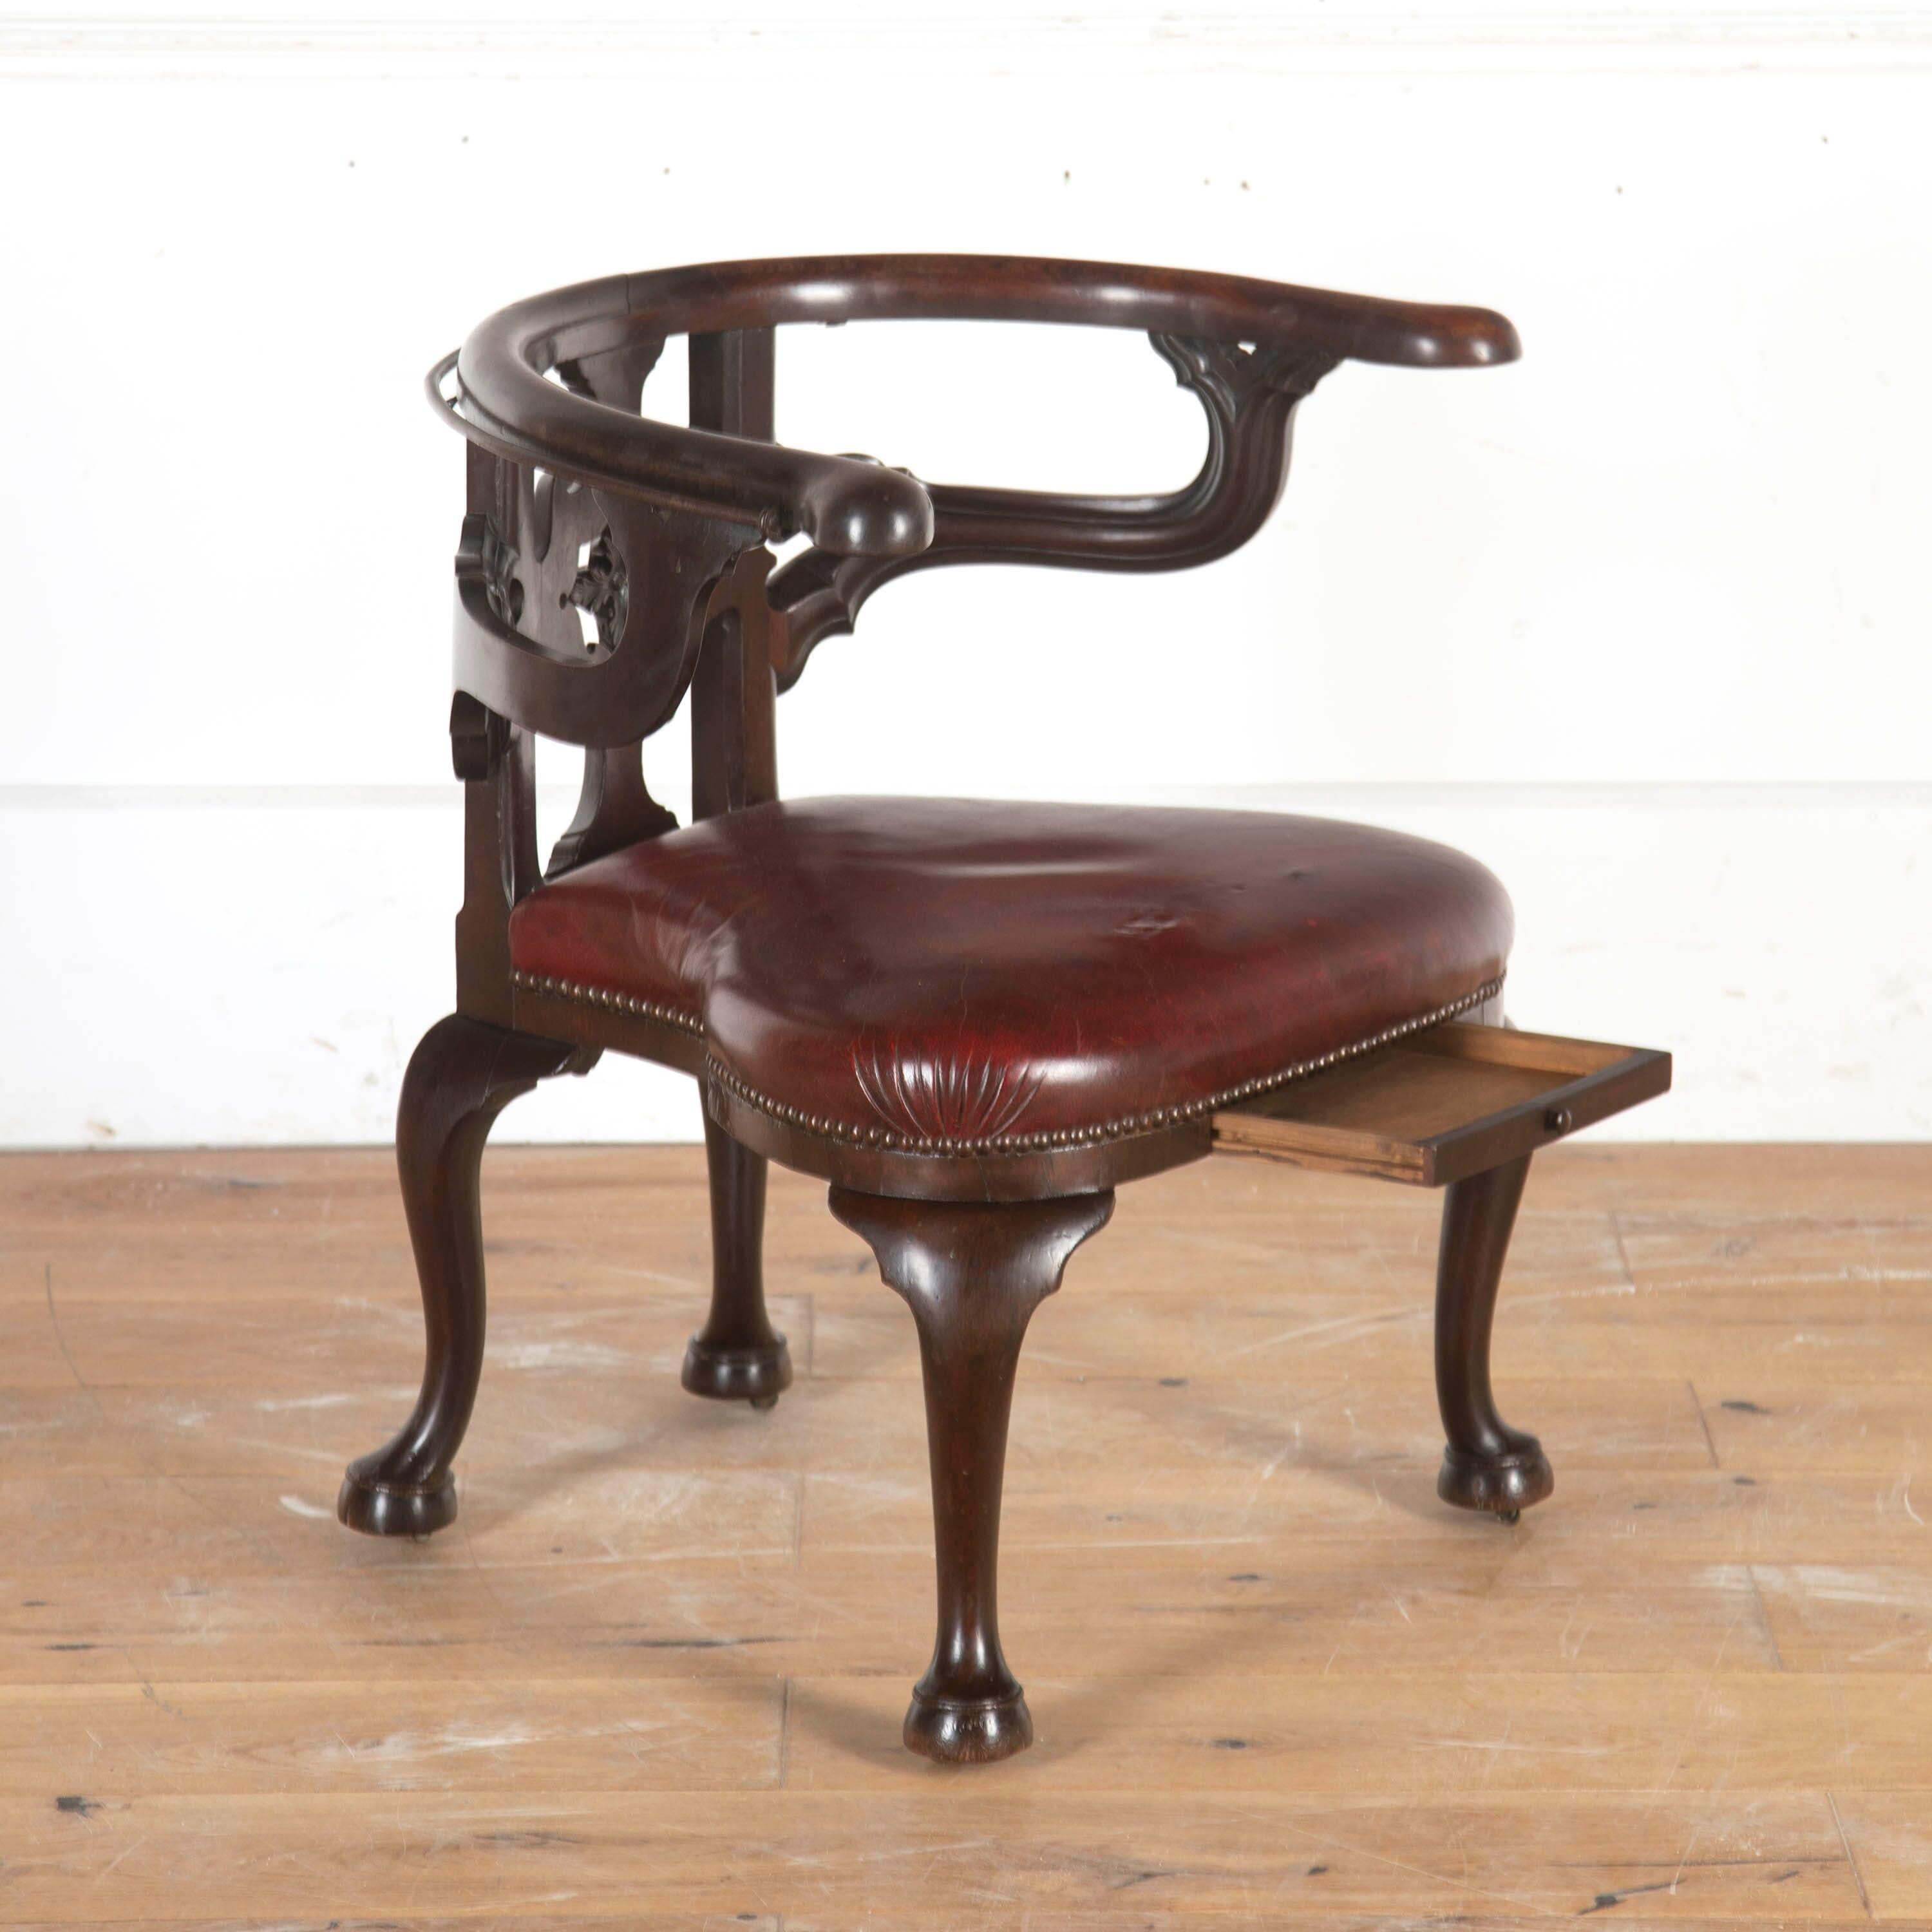 Irish cockfighting chair by Williams & Gibton, circa 1830.

This beautiful chair is complete with its original carved and pierced yoke rail with a very decorative cross leaf design. It also retains a restored under-seat drawer. 

It is supported